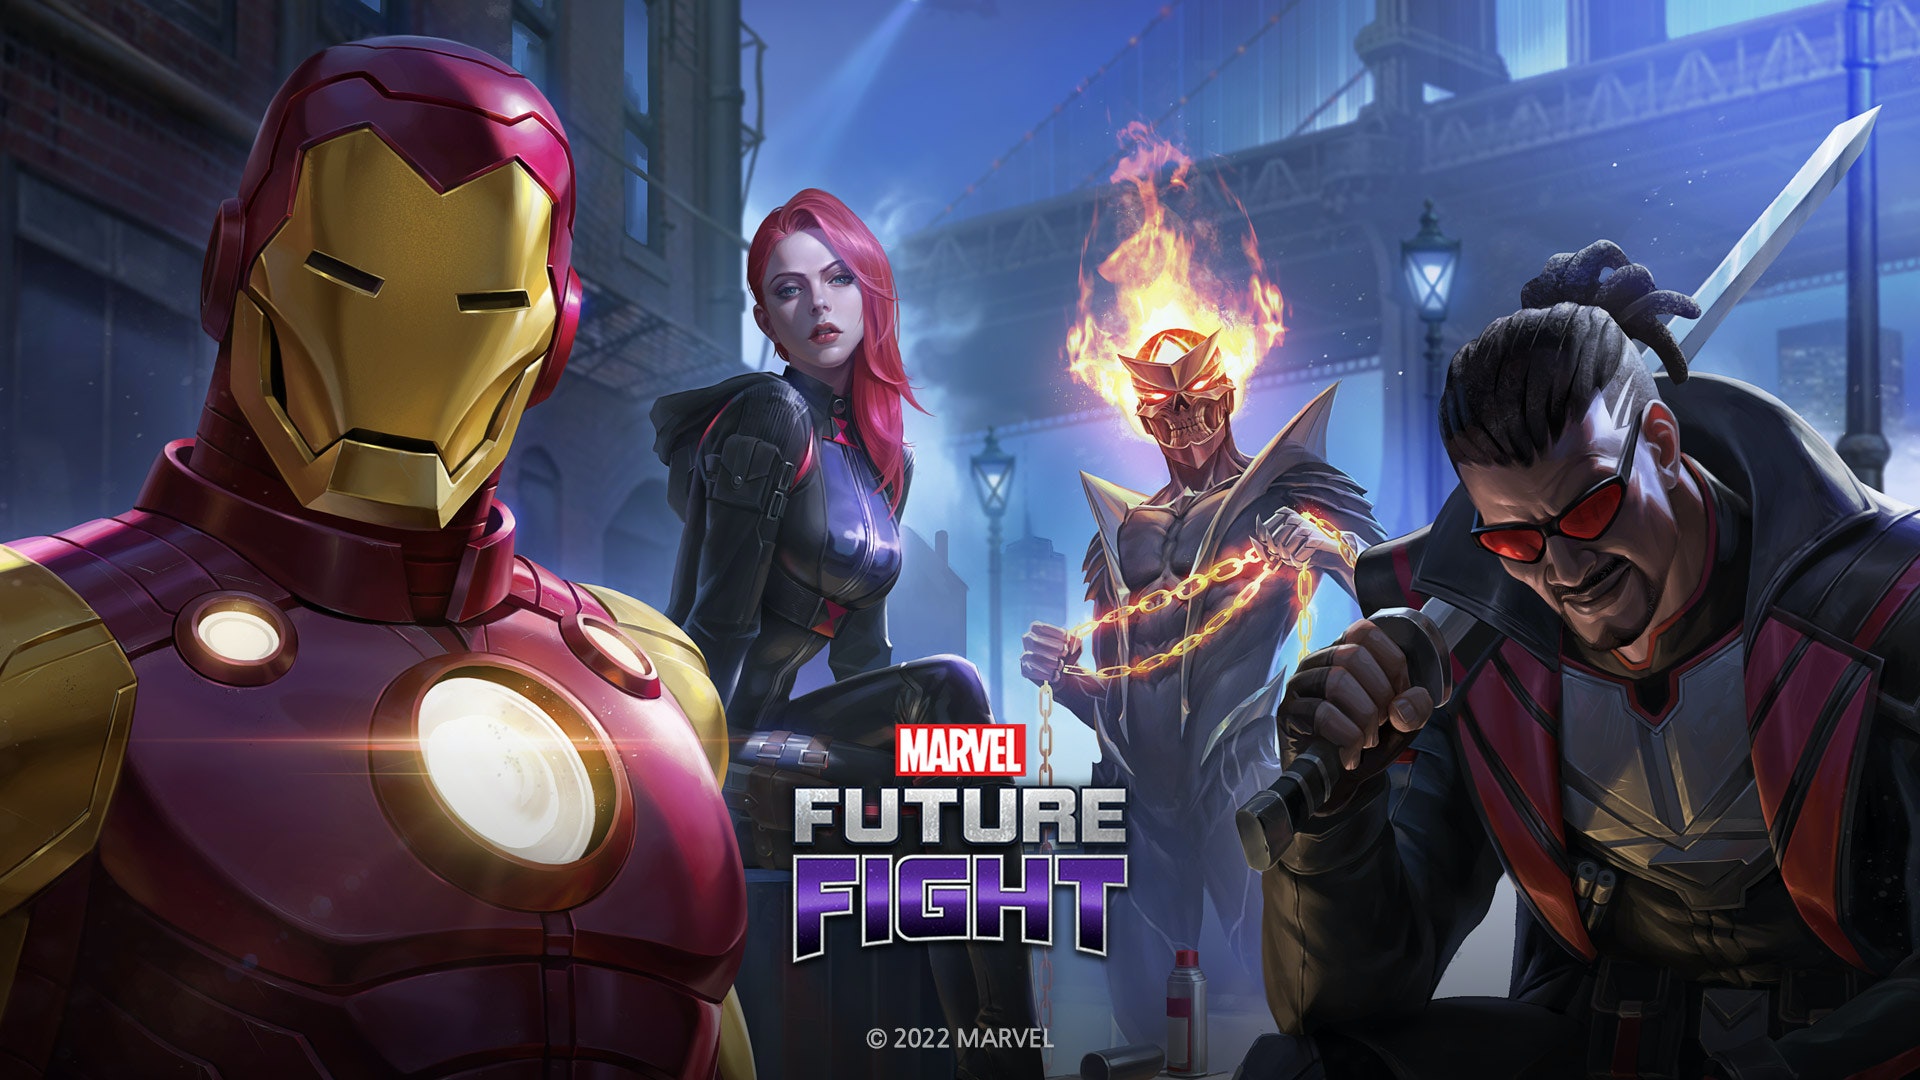 New Uniforms, Upgrades, And A Giant Boss Arrive In 'Marvel Future Fight' – COMICON